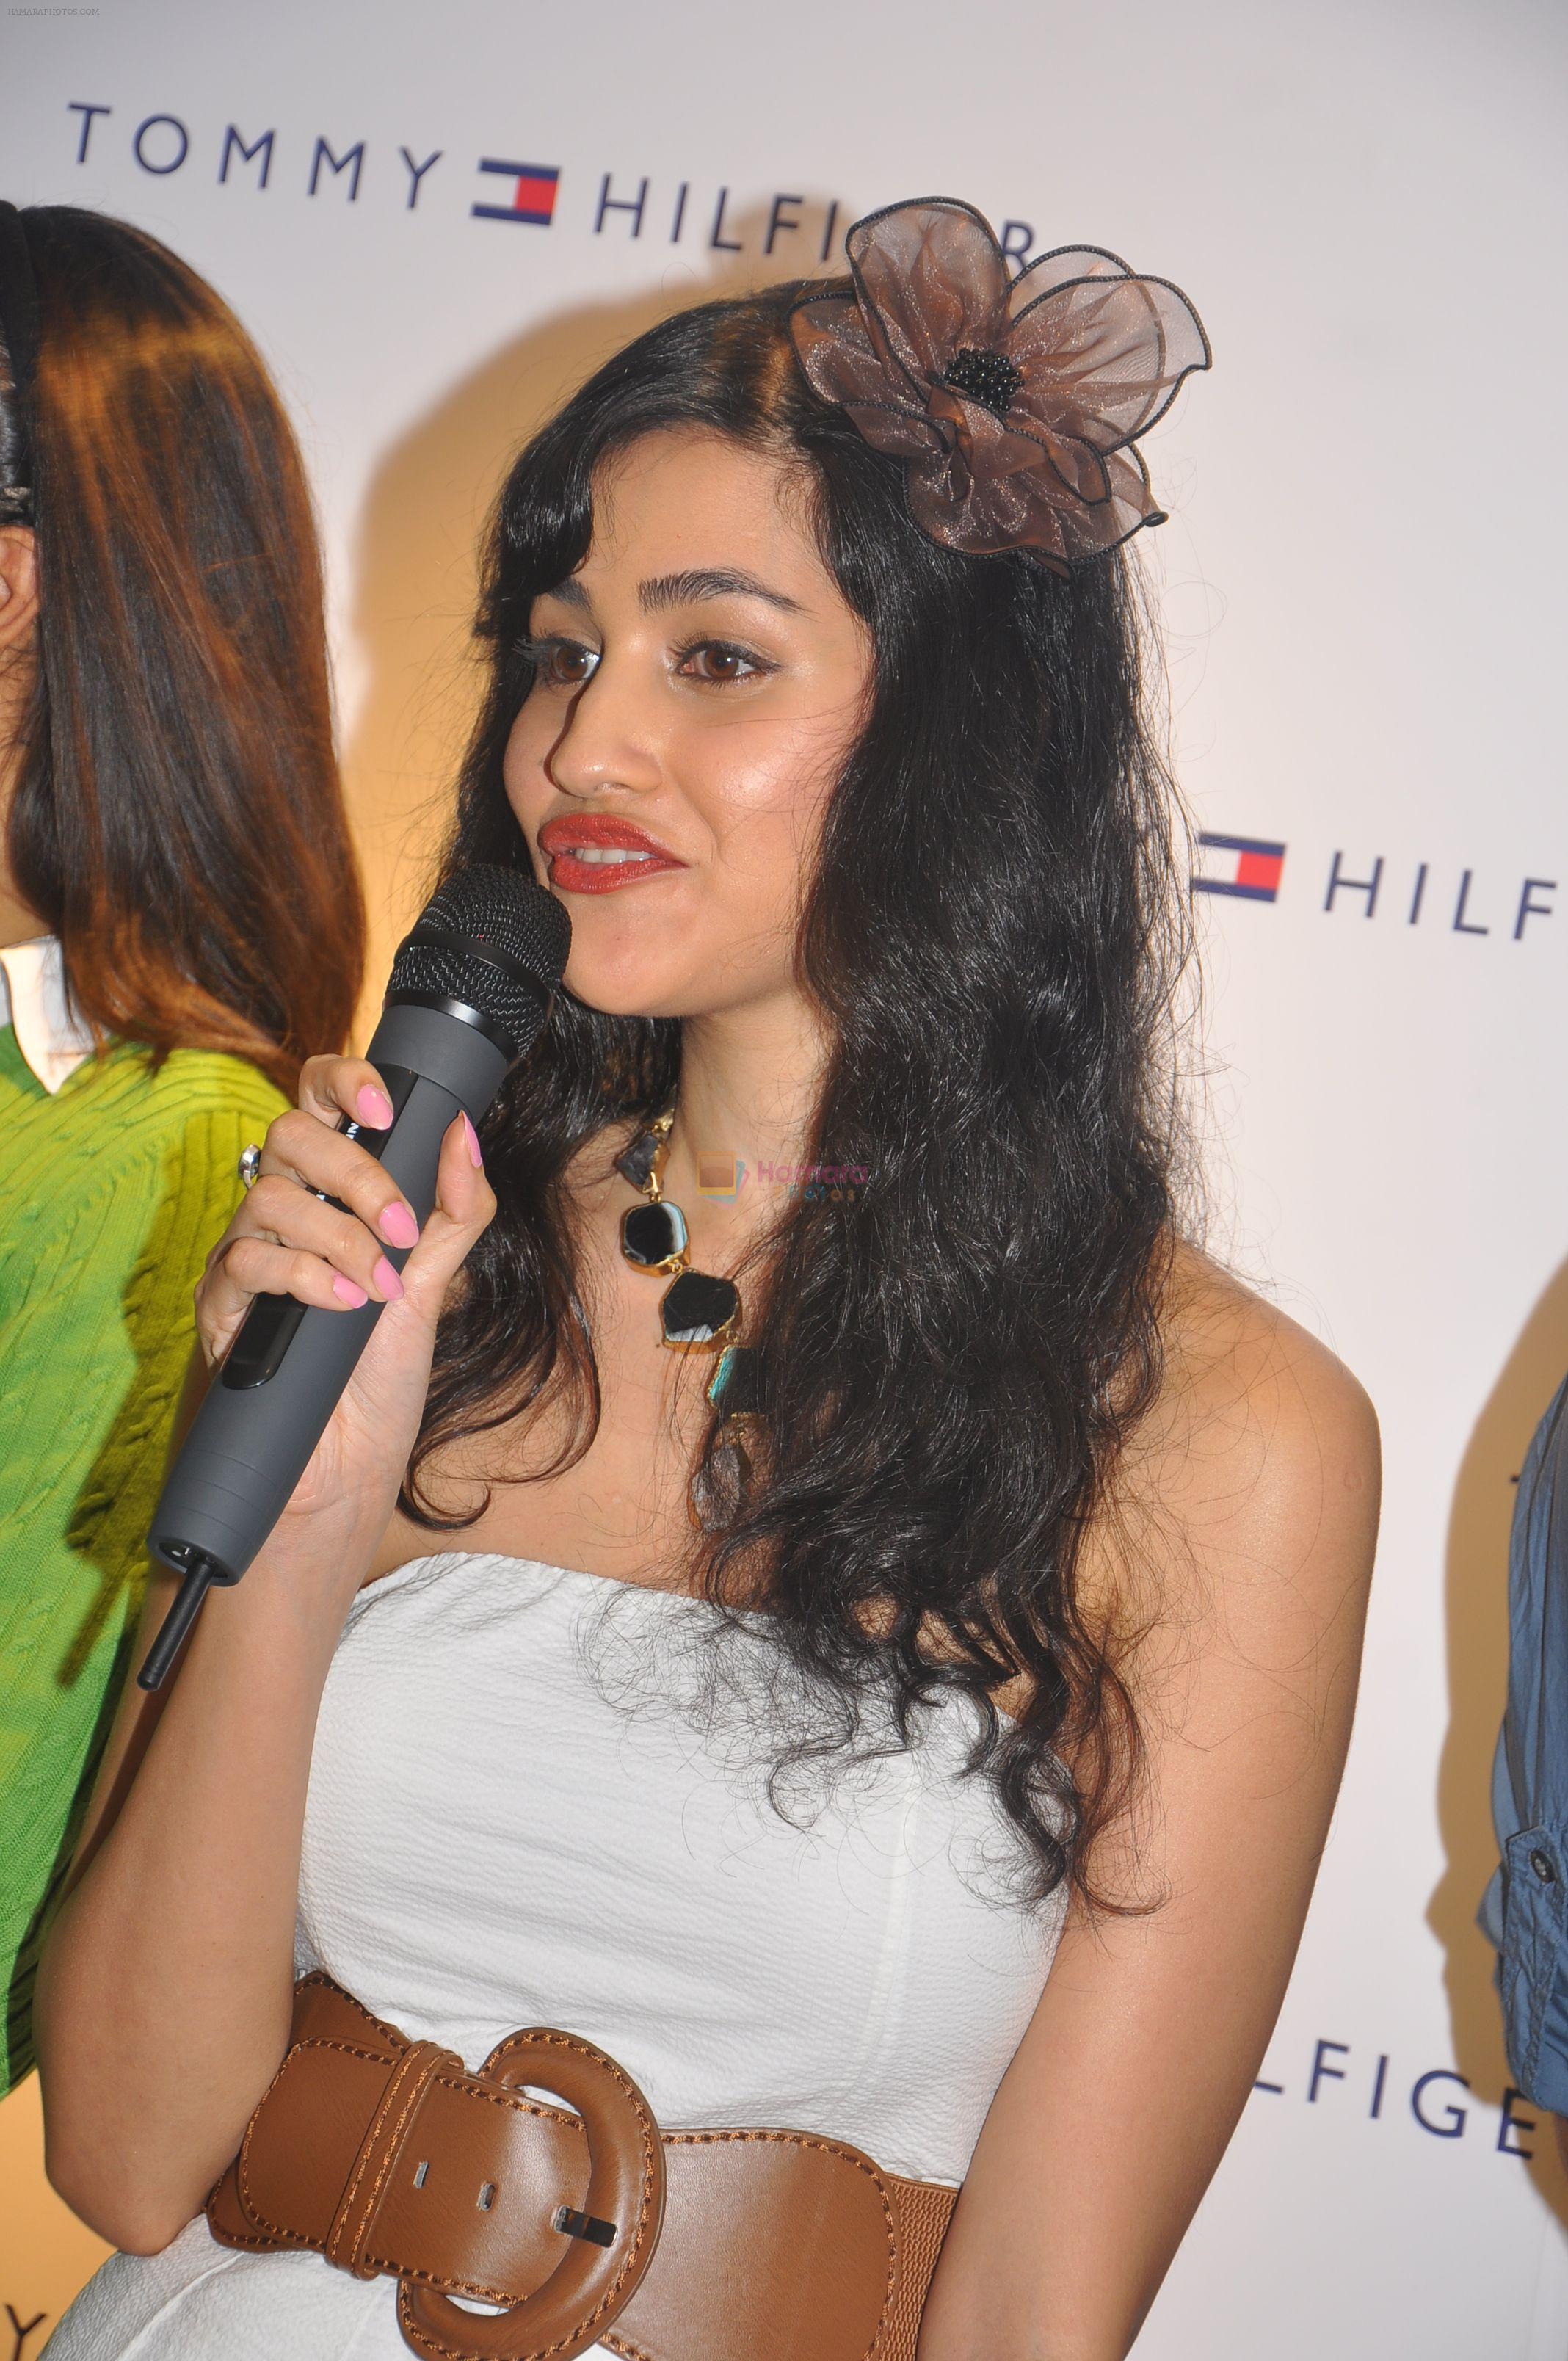 The Opening of Tommy Hilfiger store in Hyderabad at Banjara Hills on 15th September 2011